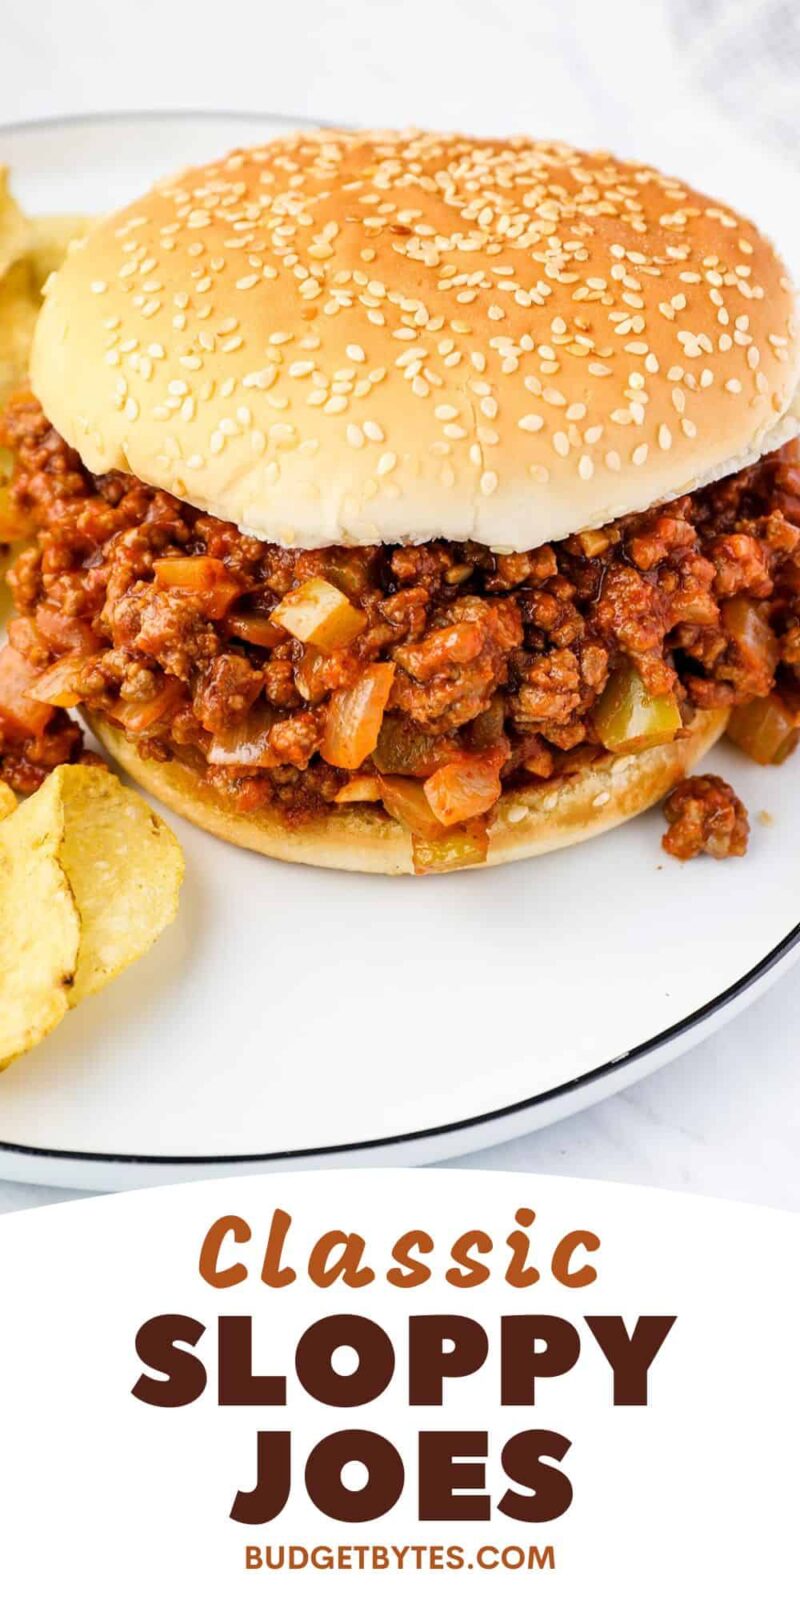 Sloppy joe on a plate with chips.